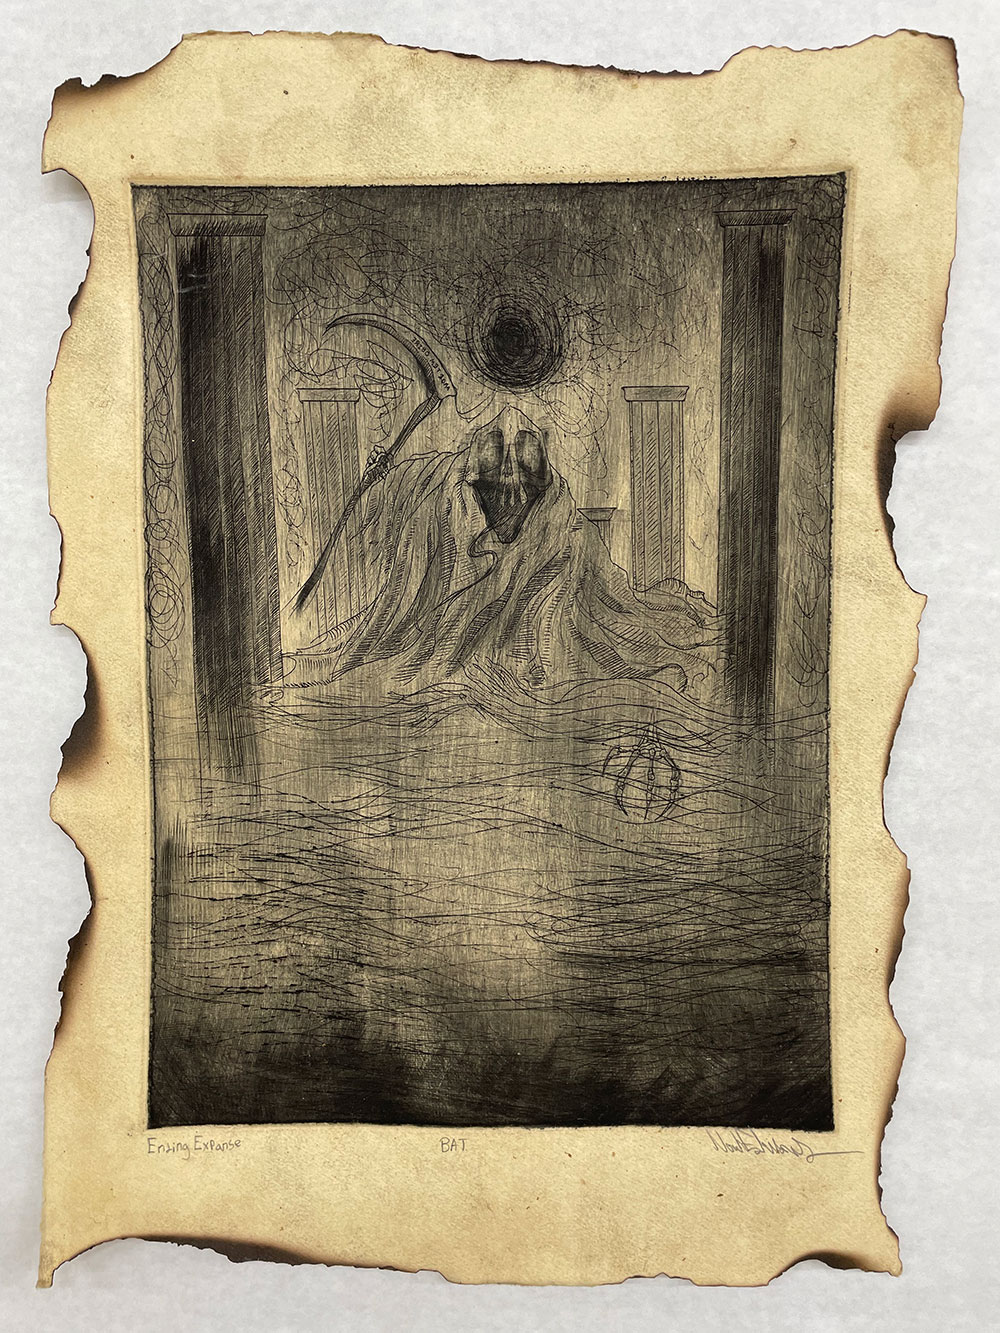 A colored printed image of what appears to be the grim reaper - the paper it self looks like it has been on fire. 